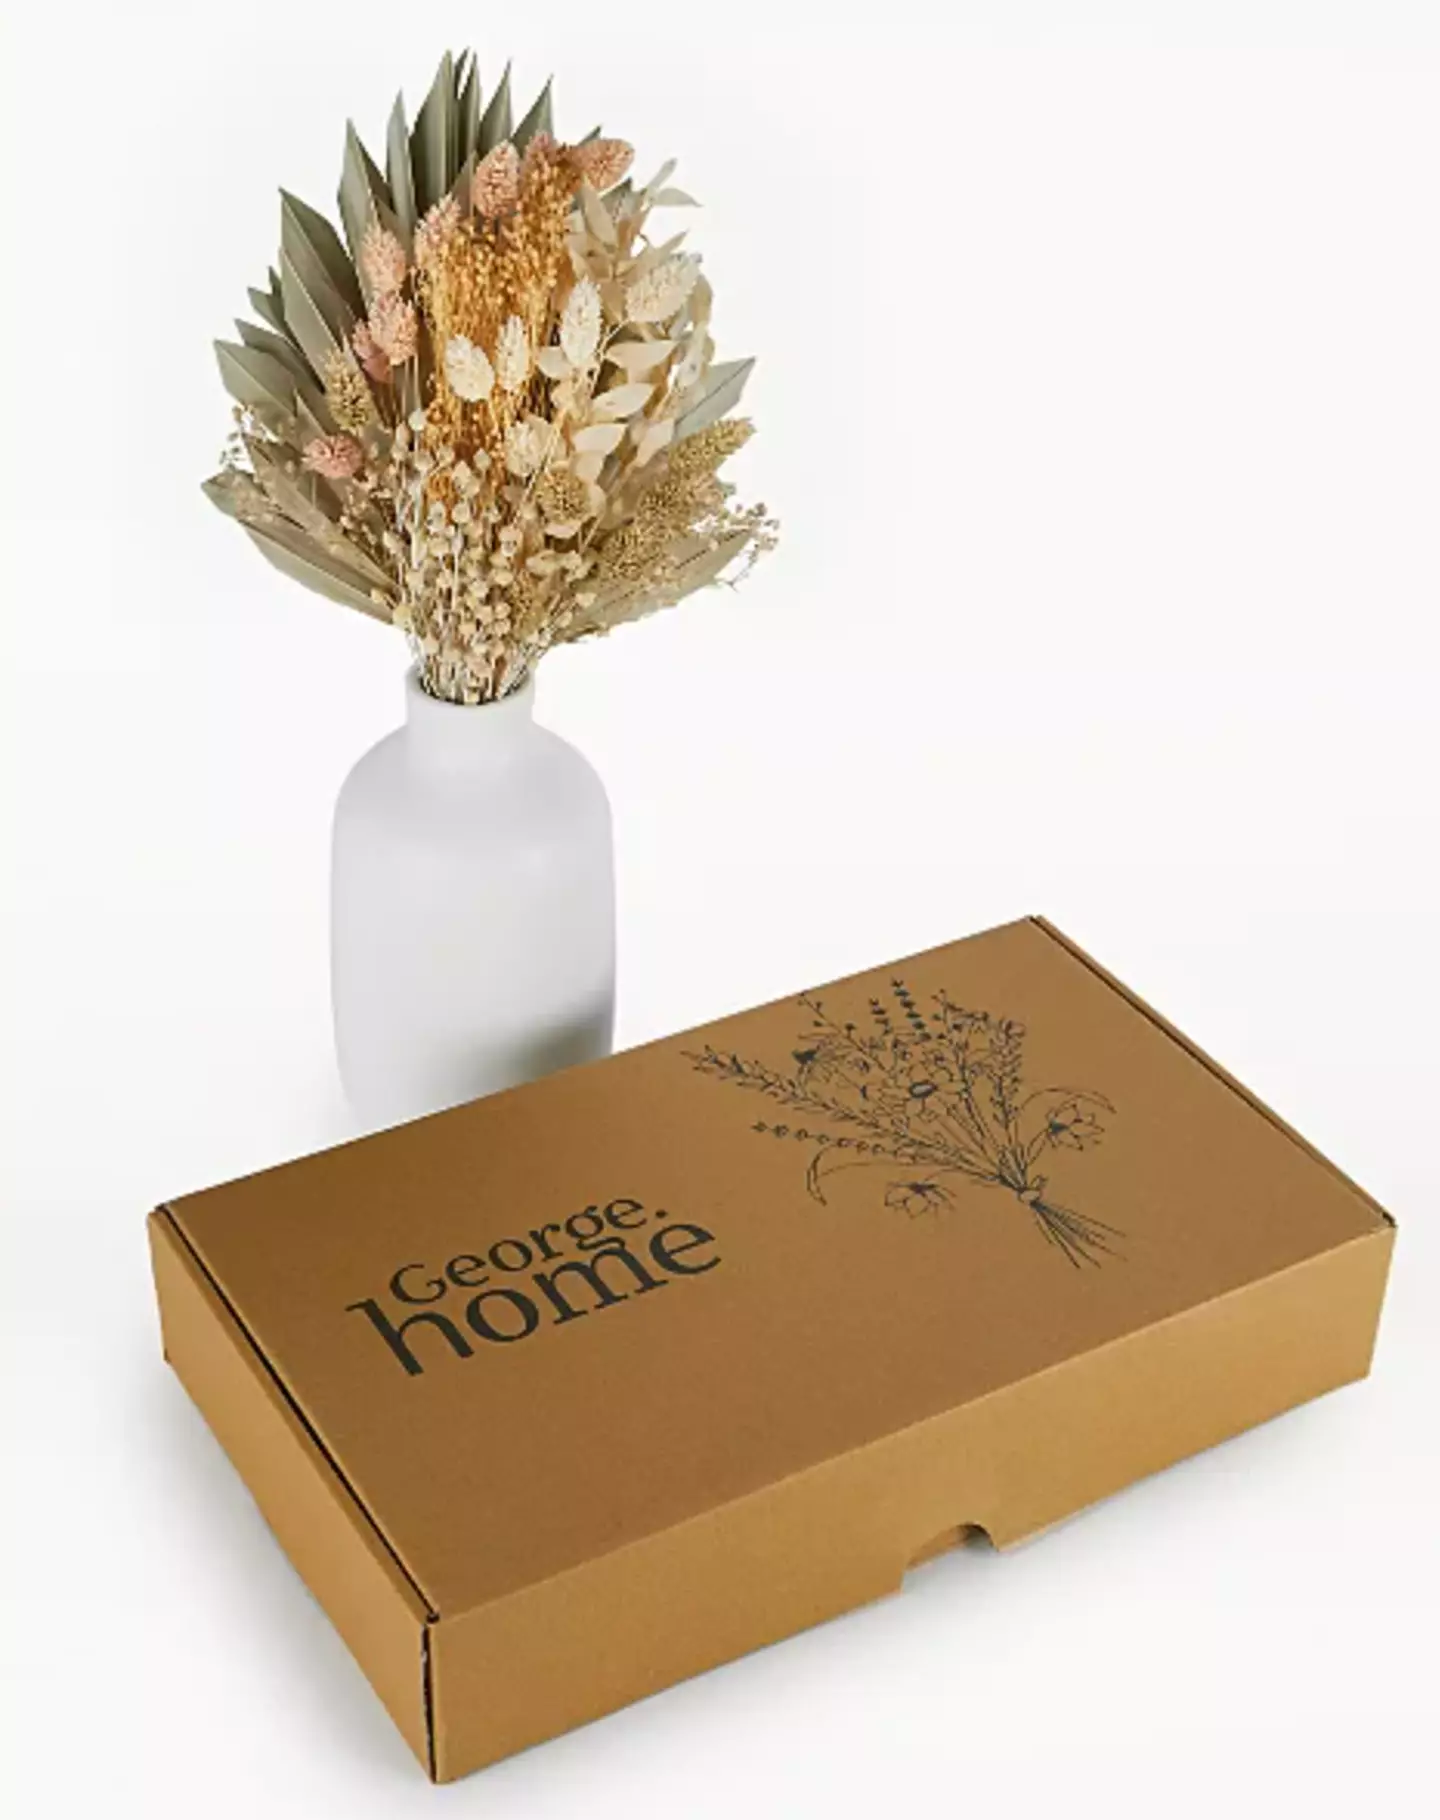 The flowers come in a craft box which makes them the perfect gift (